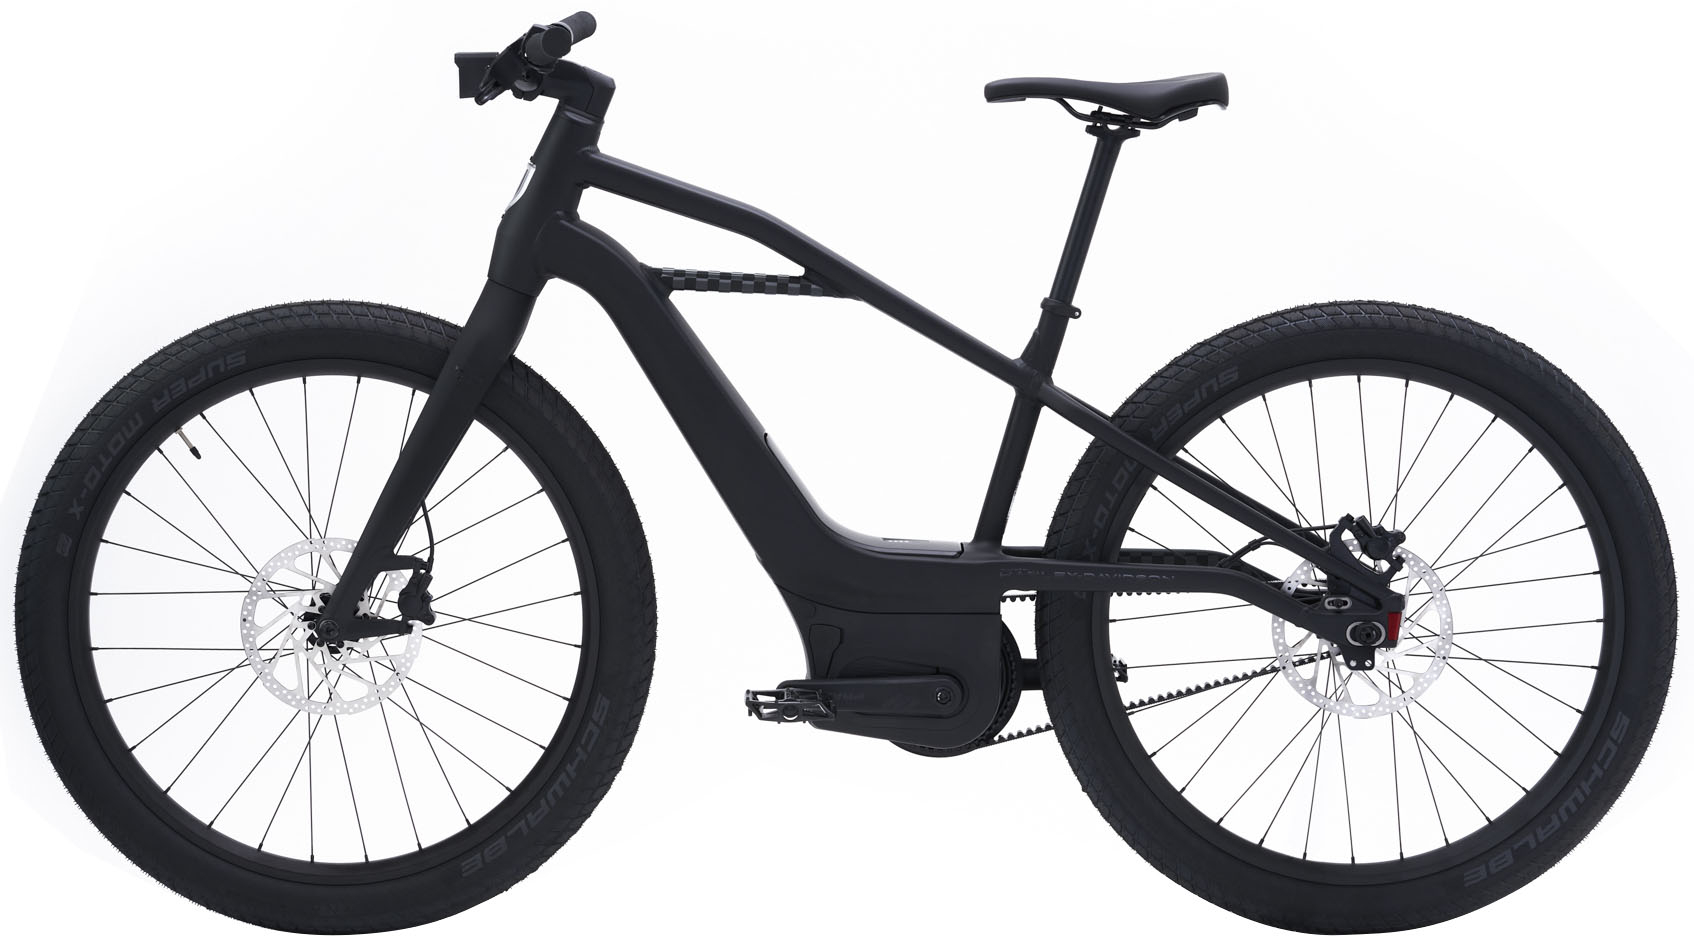 Angle View: Serial 1 - MOSH/CTY eBike, w/up to 105mi Max Operating Range & 20mph Max Speed - Black